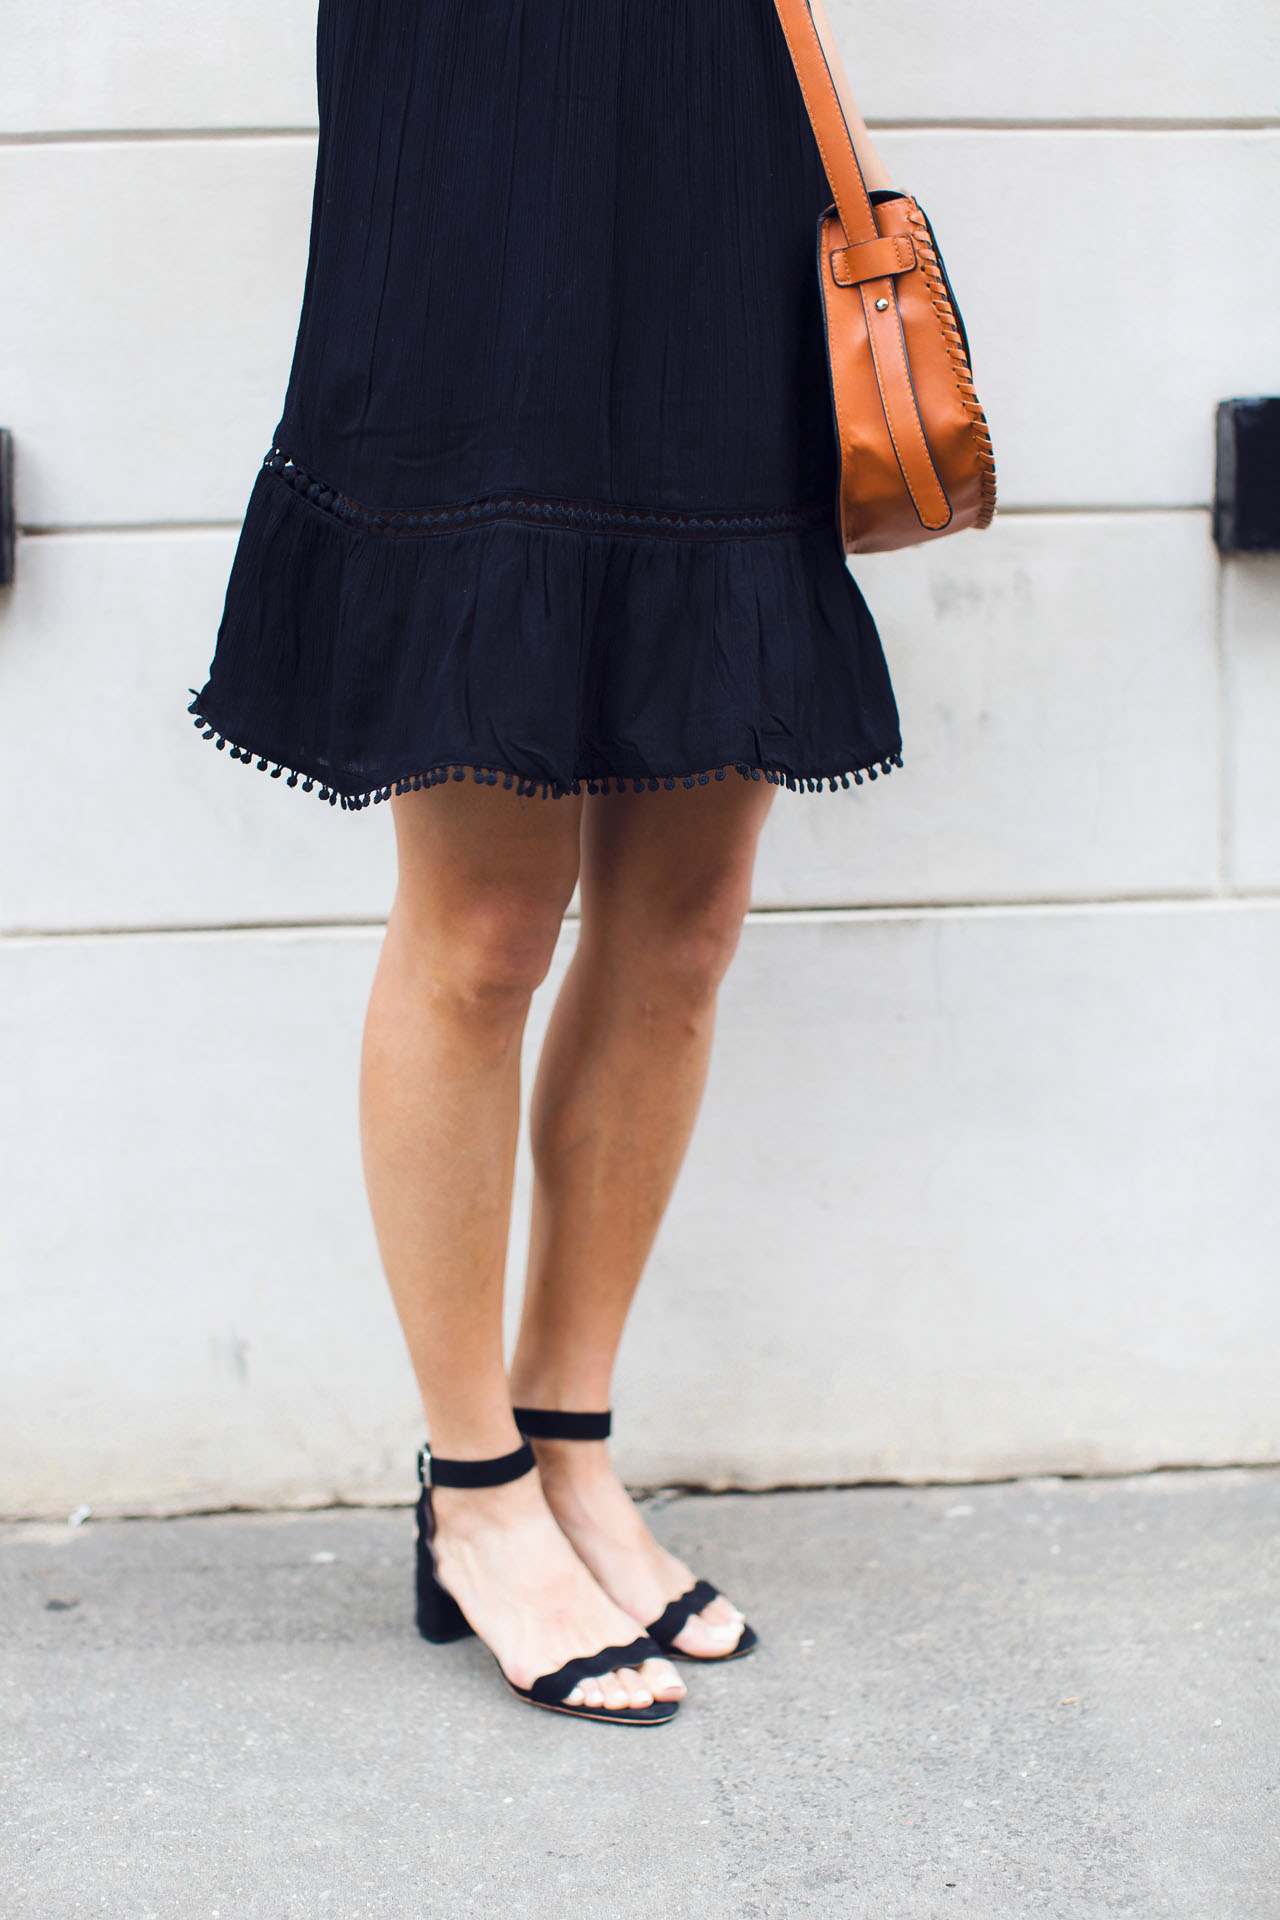 Old Navy Crochet Dress | The View From 5 Ft. 2